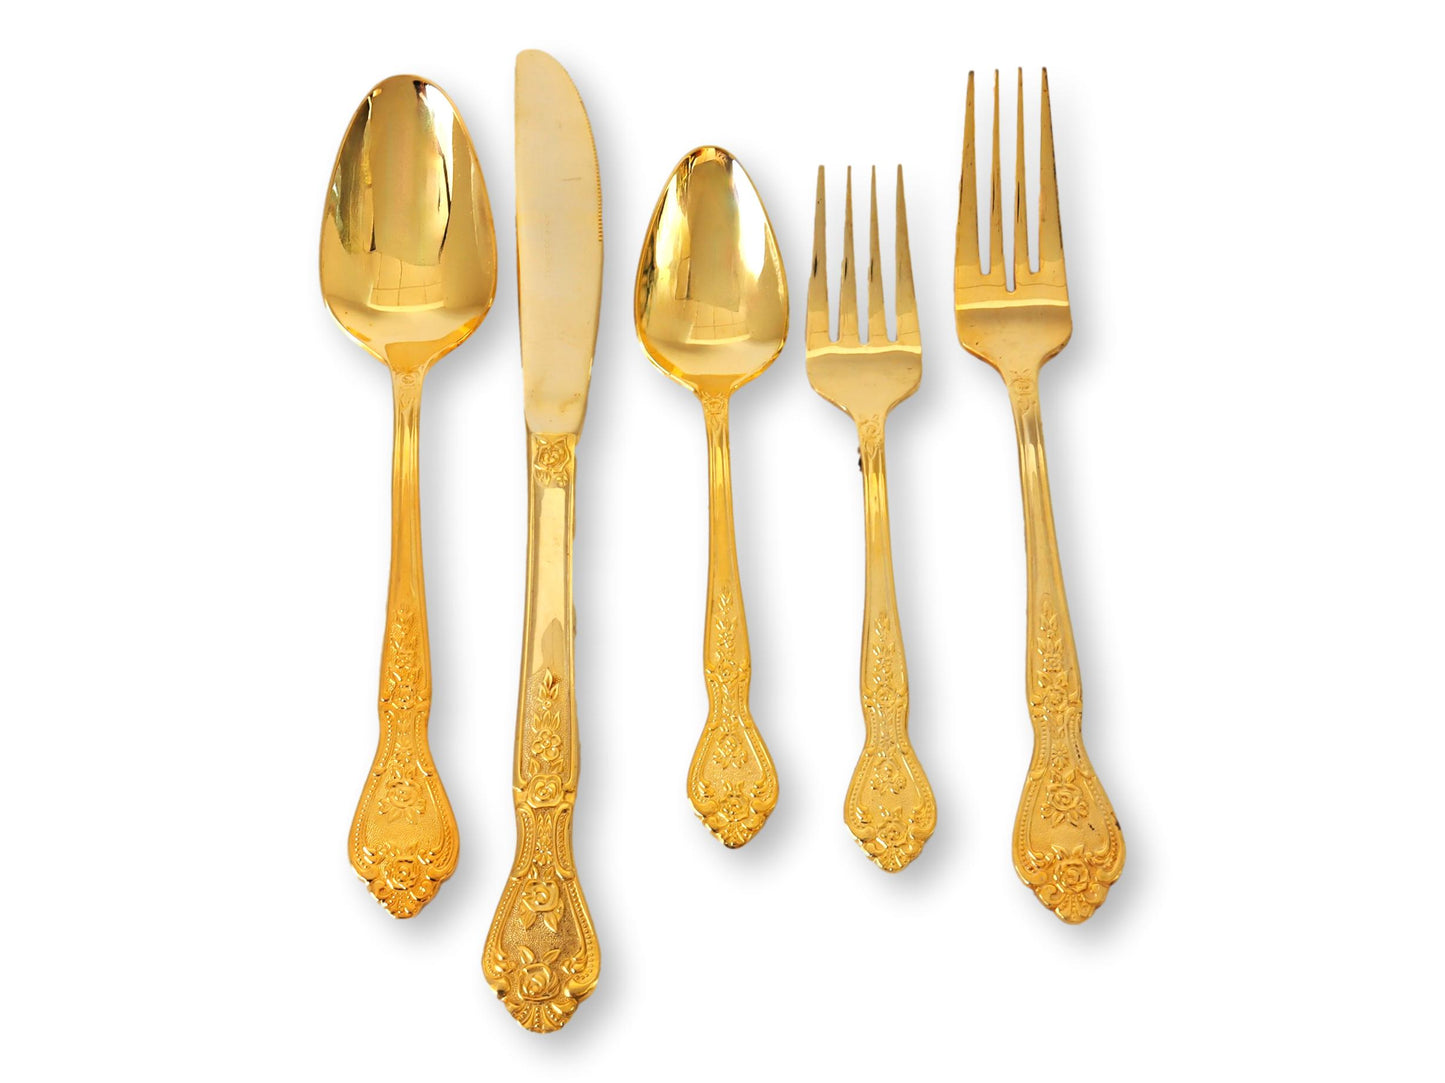 Rogers Gold Plated Flatware / Cutlery, Service for Eight